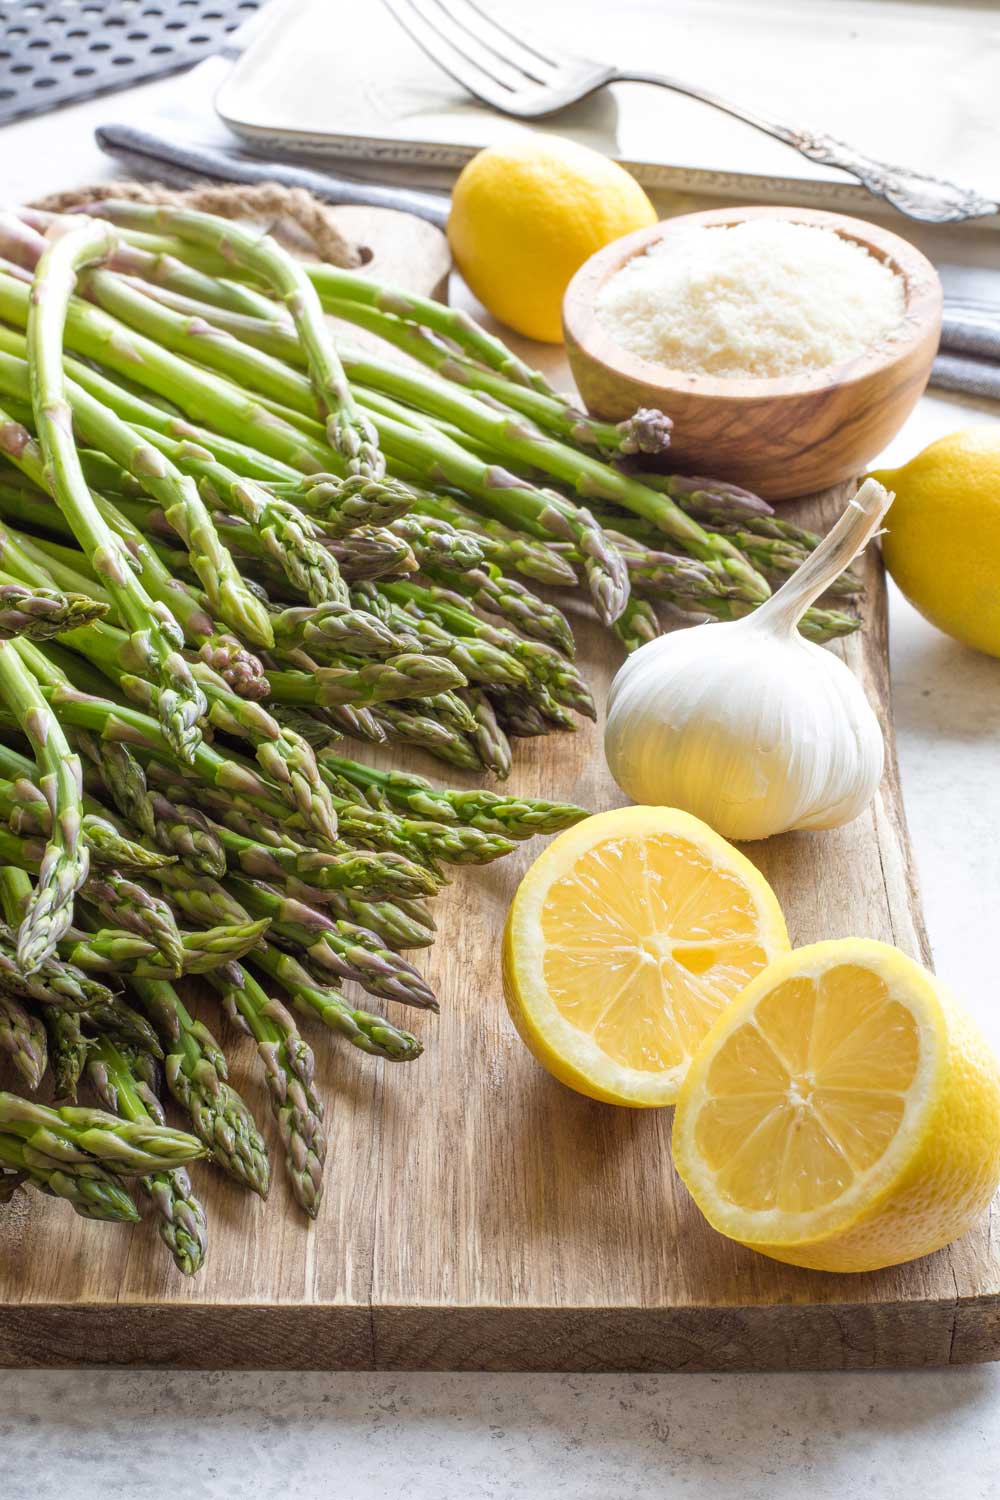 Raw asparagus on cutting board with lemons, head of garlic and bowl of parmesan cheese.